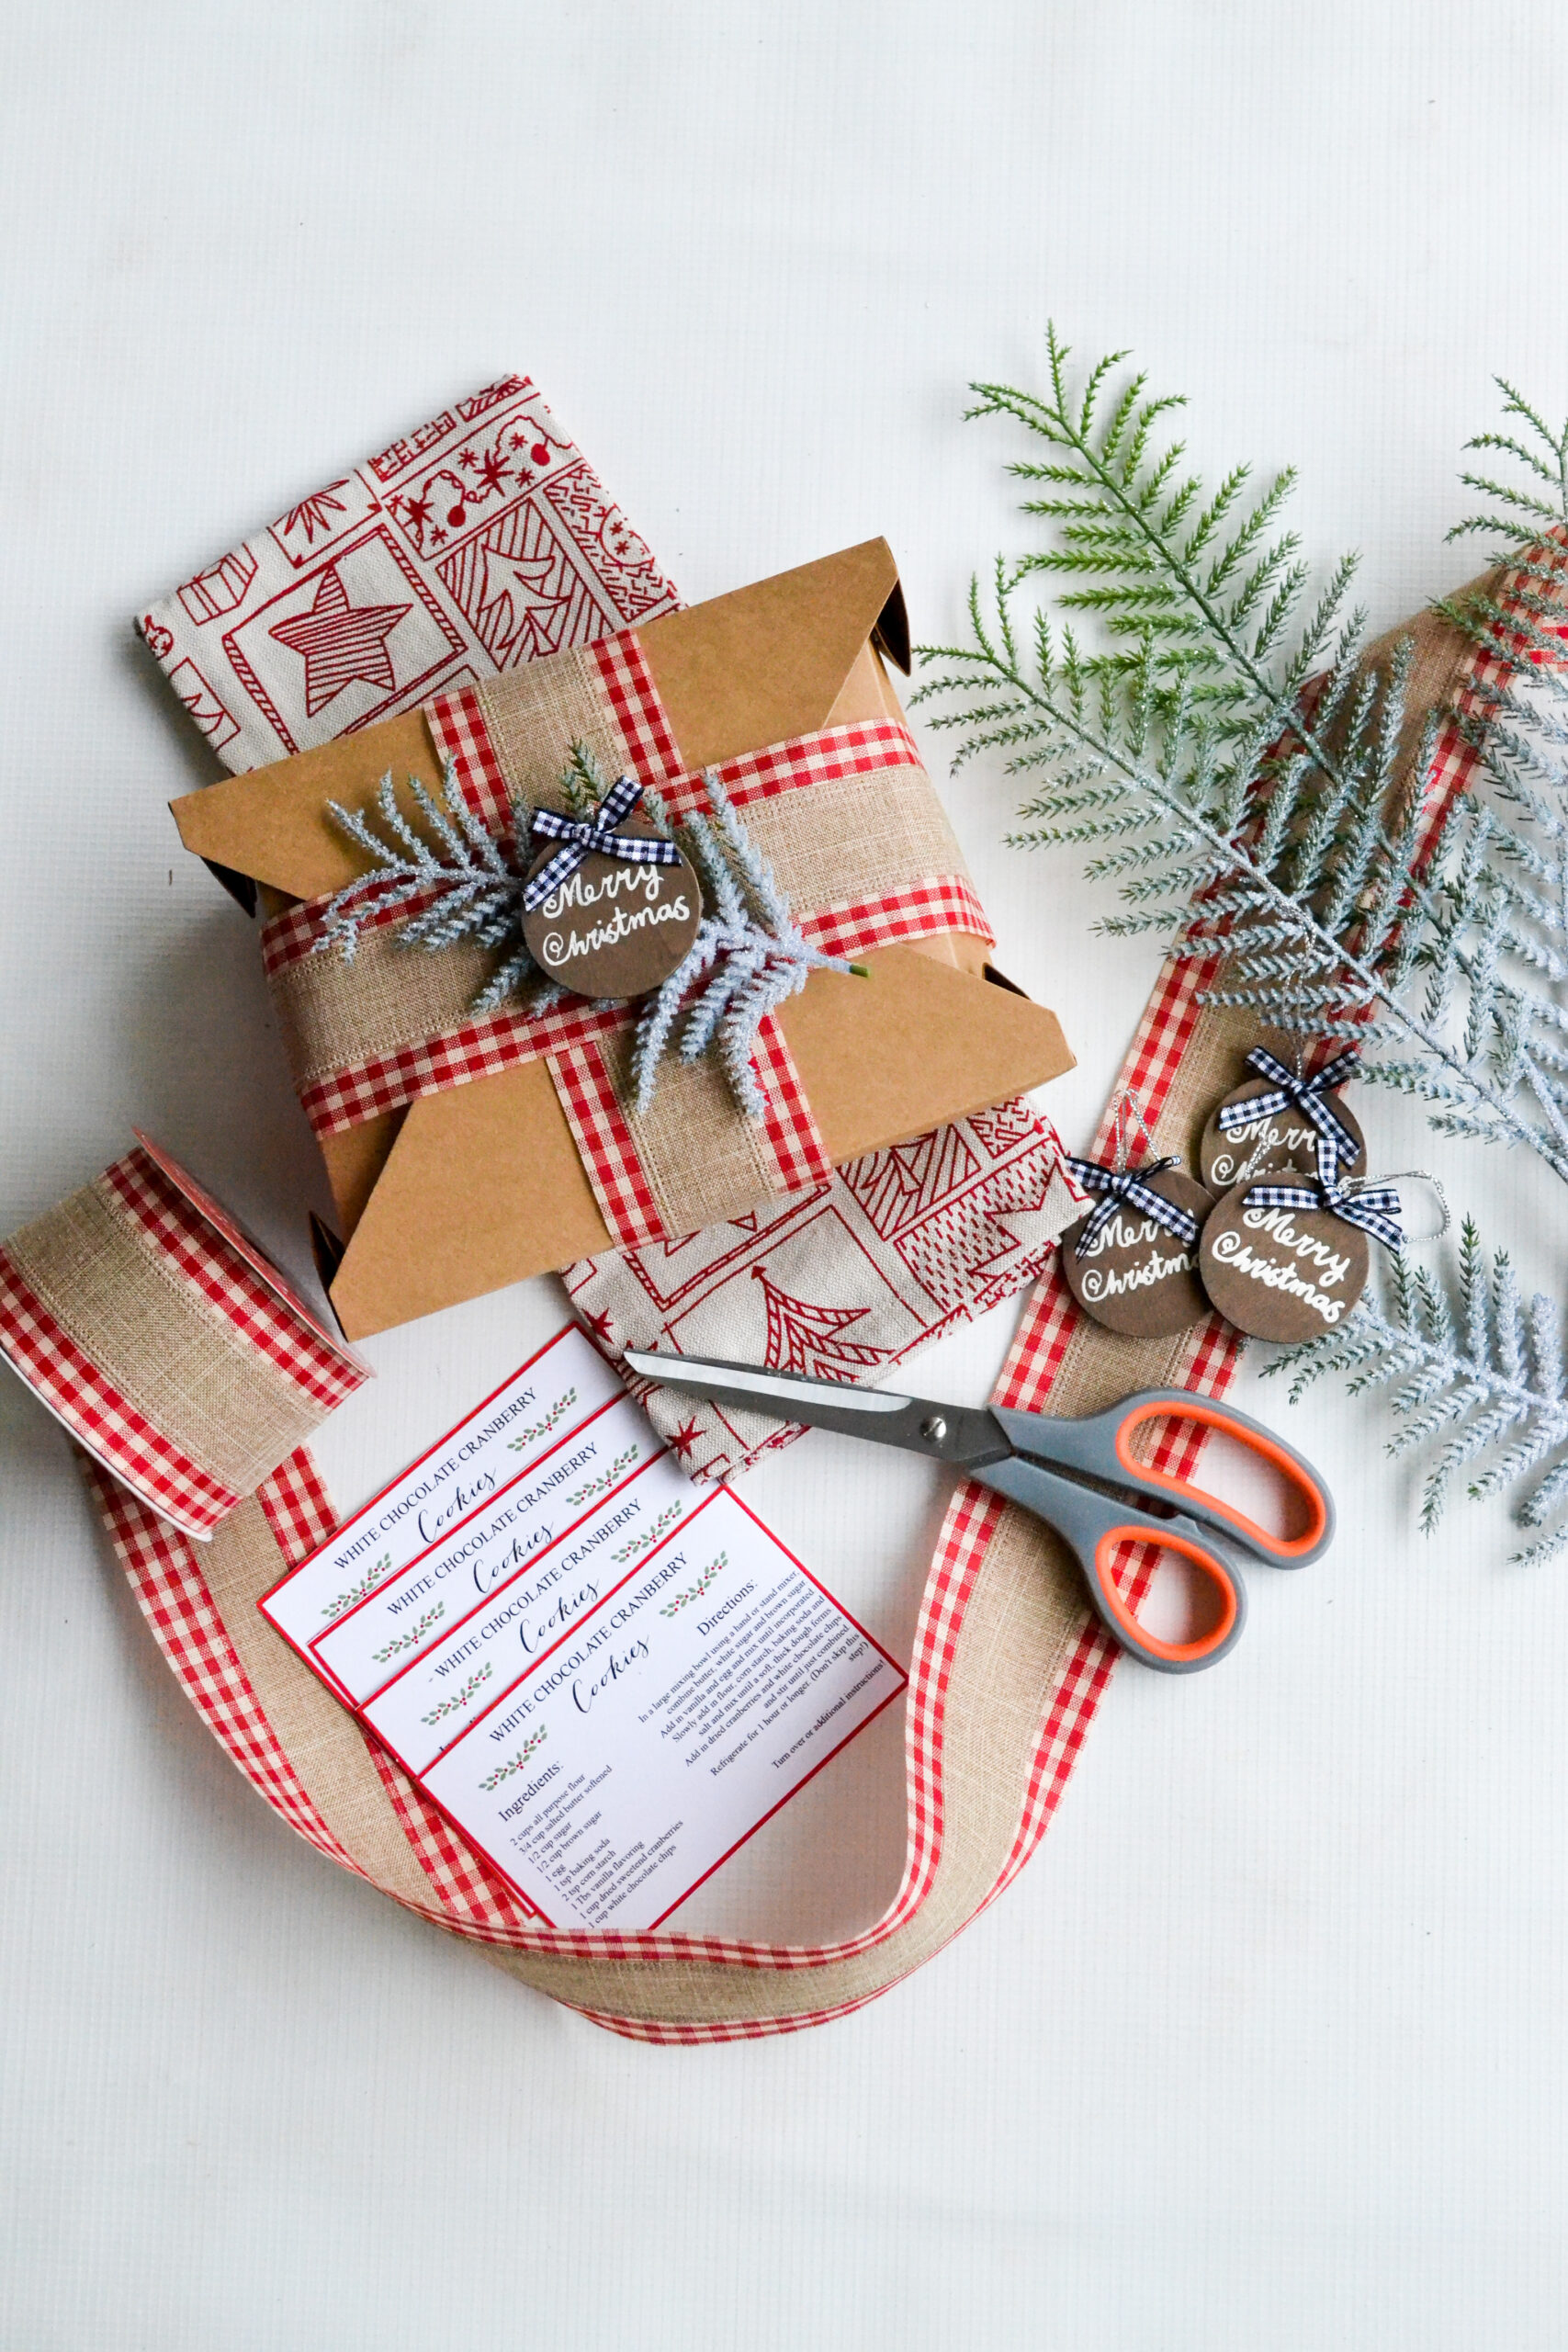 DIY Holiday Cookie Exchange Boxes